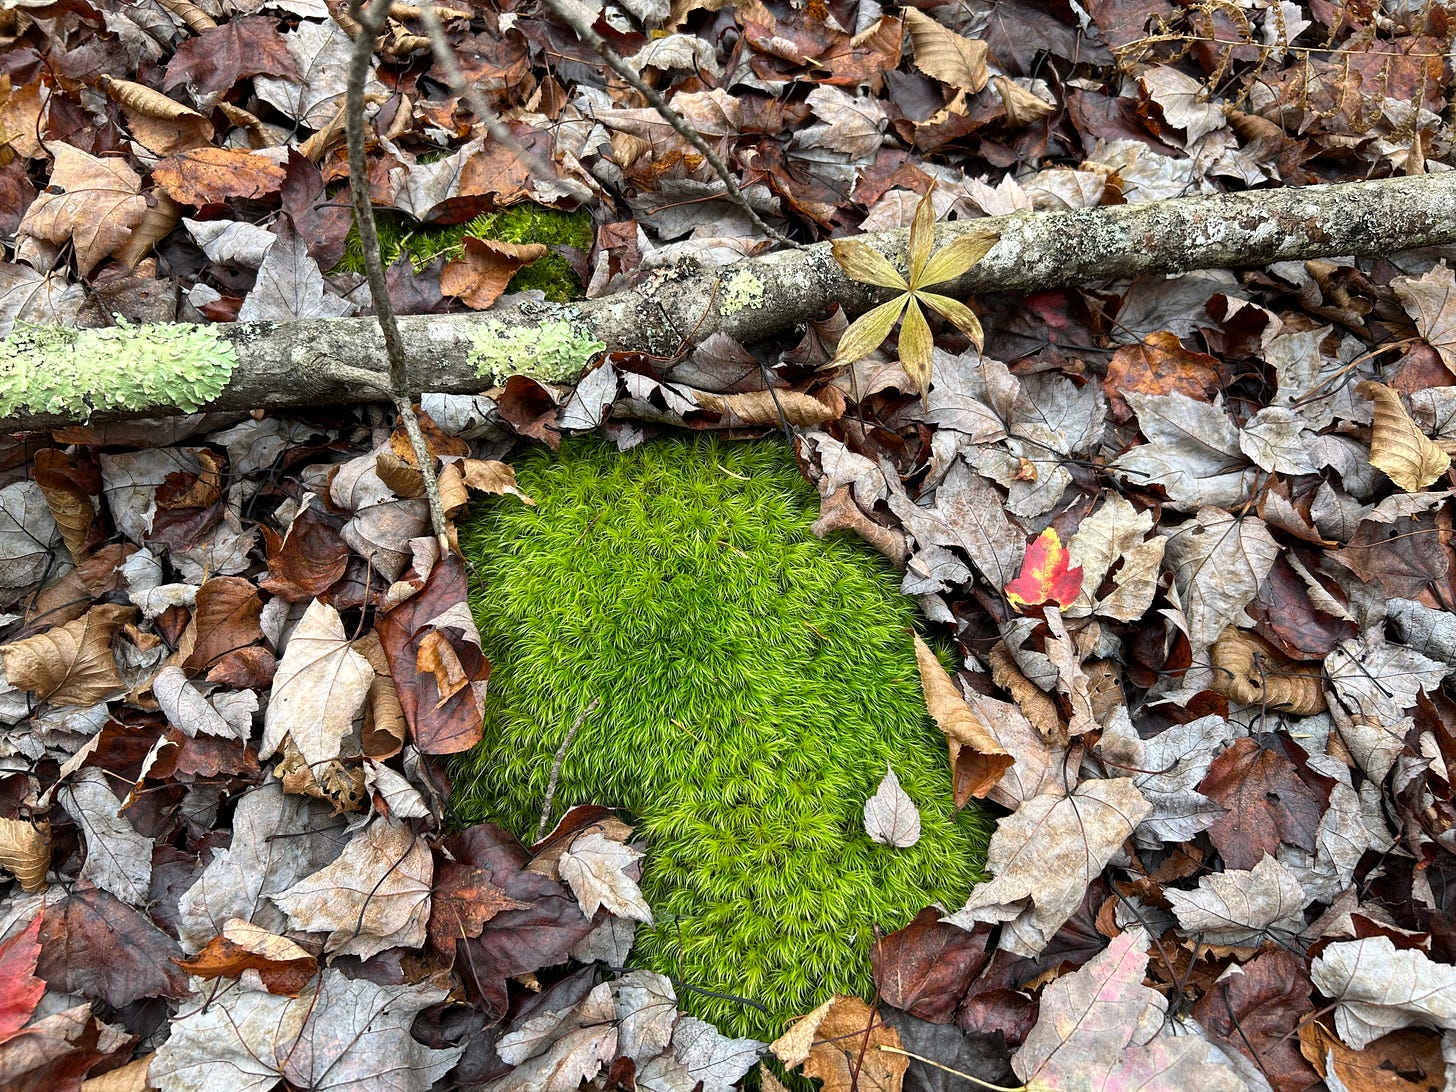 A particularly electric green patch of moss poking out amongst fallen leaves